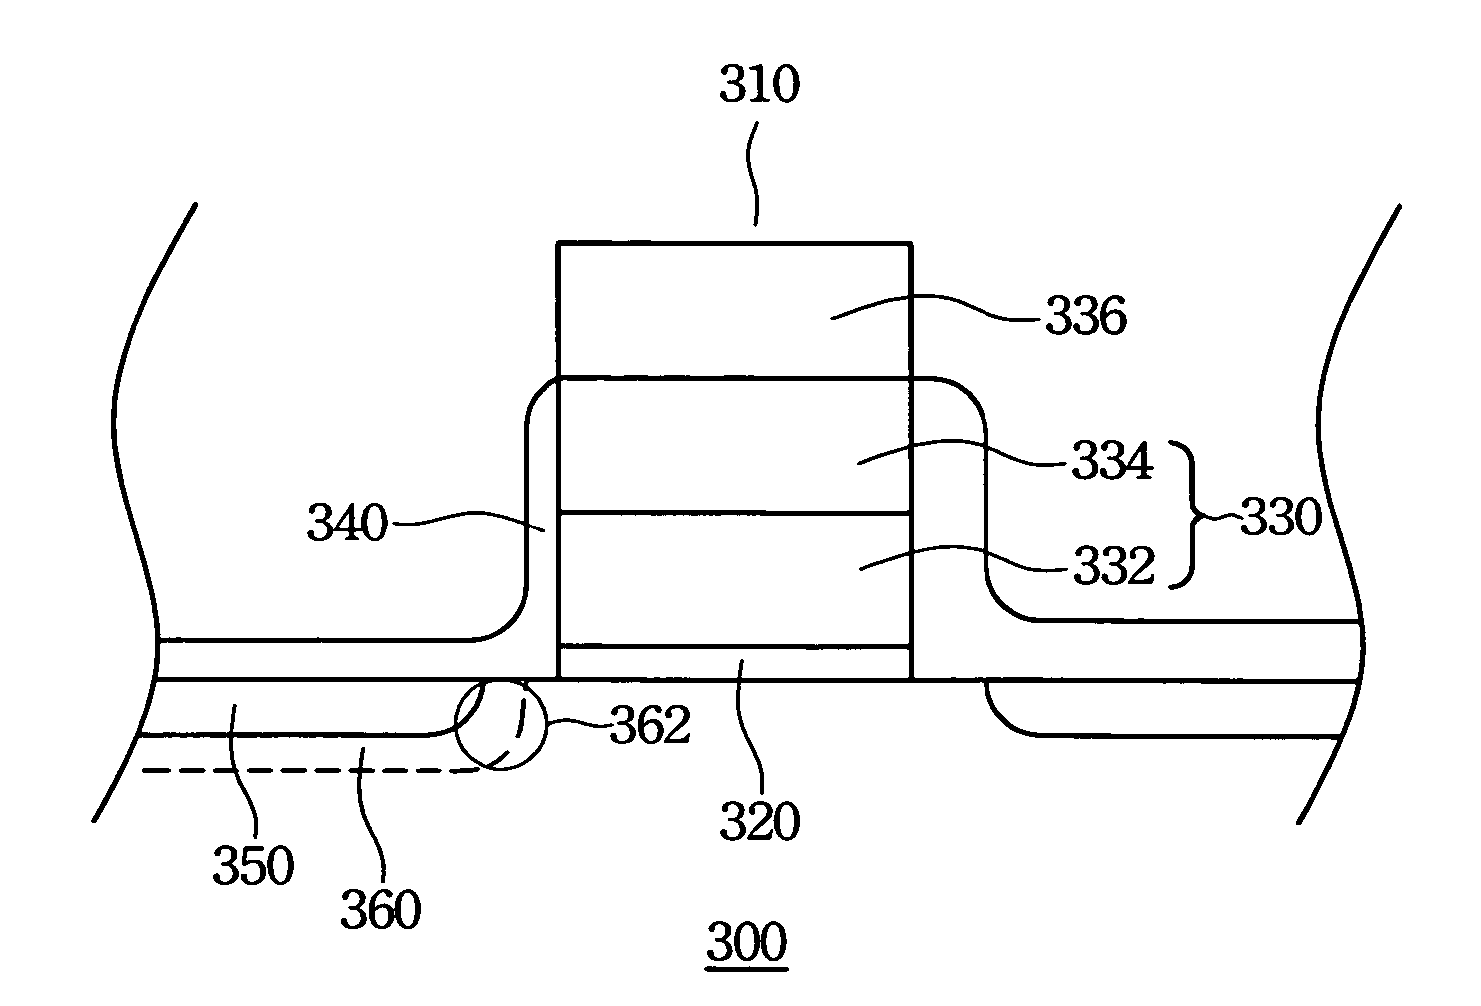 Method of fabricating a MOSFET device